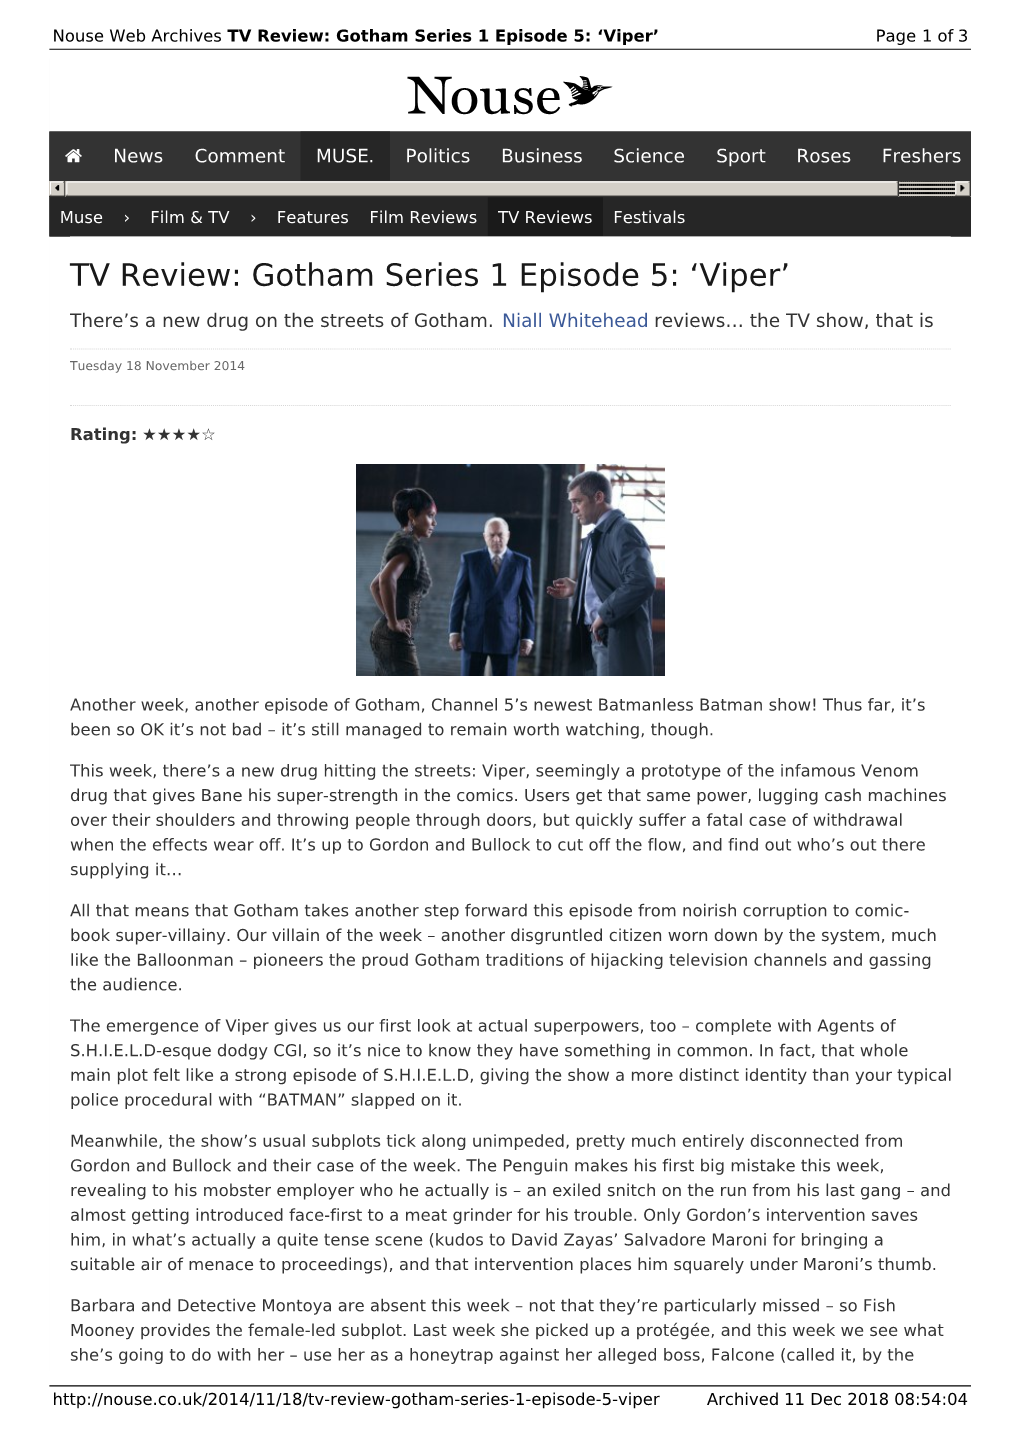 TV Review: Gotham Series 1 Episode 5: 'Viper' | Nouse